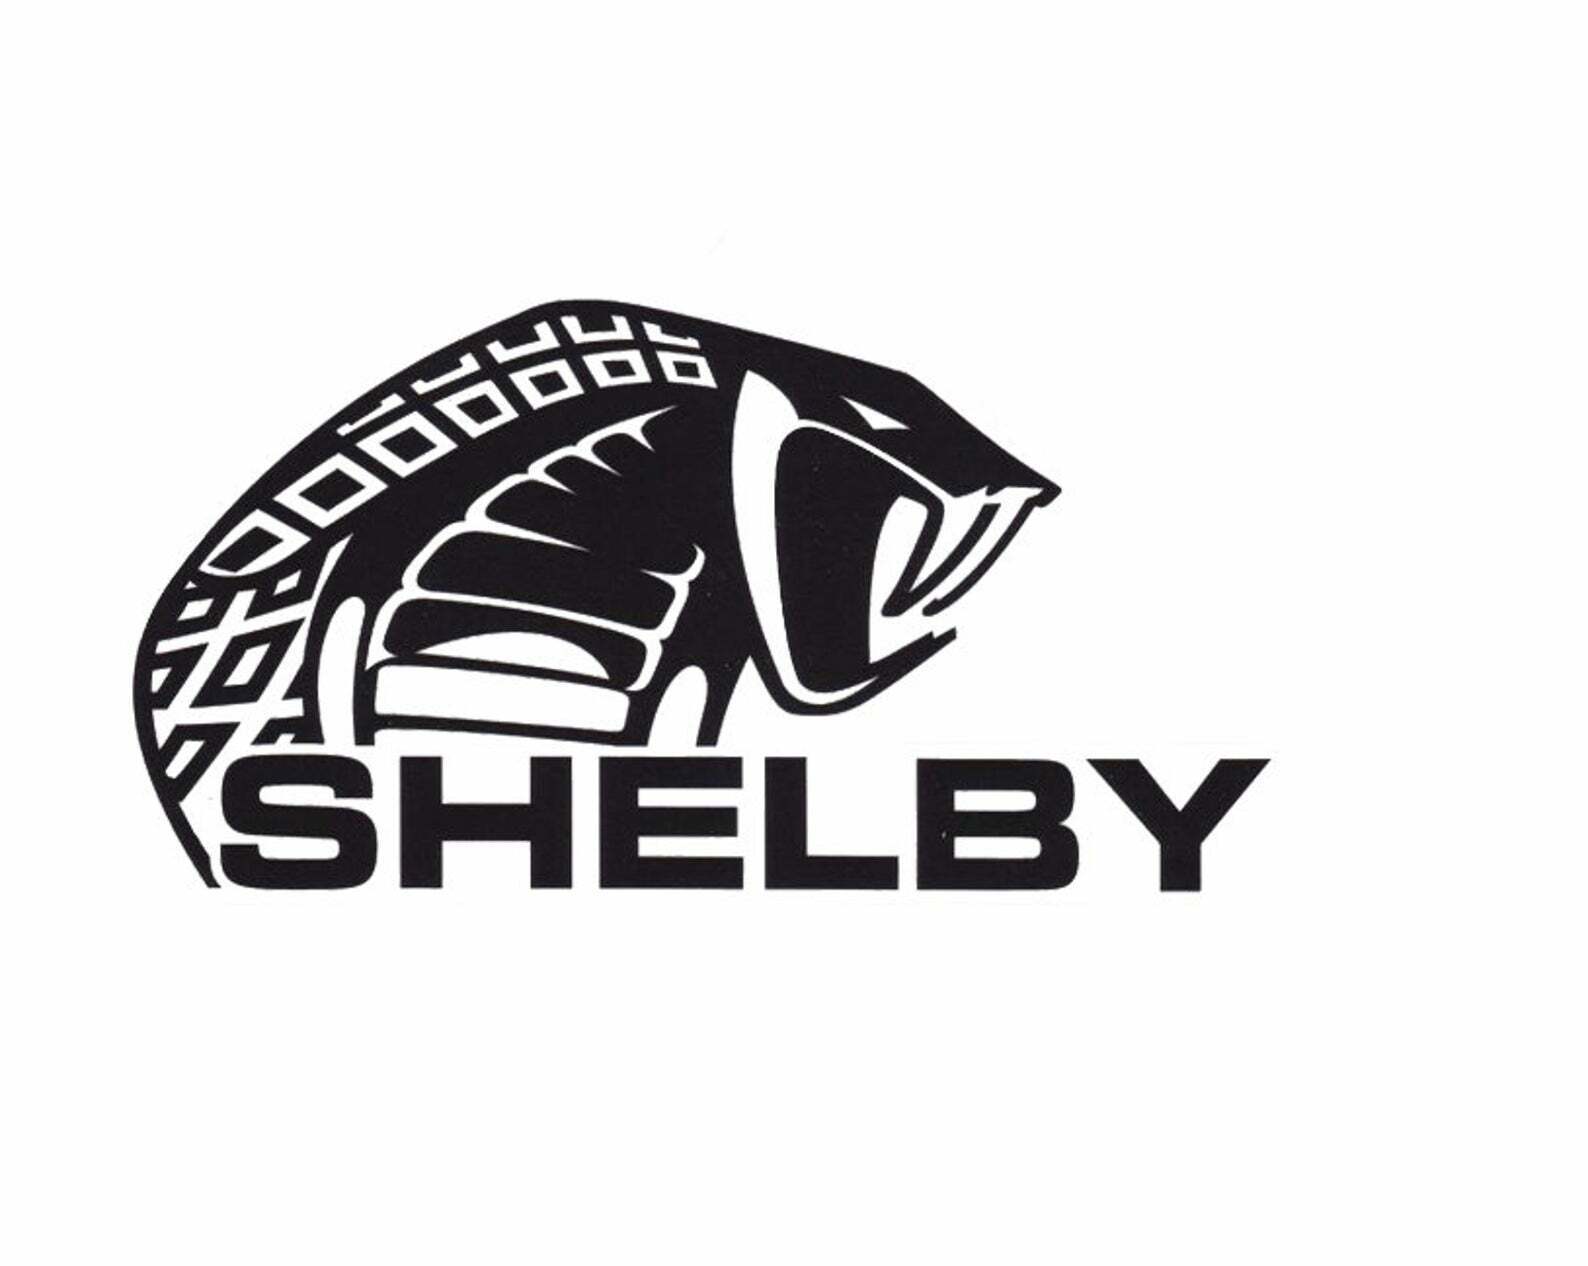 Vinyl Decal- Fits Ford Shelby Racing (Pick Size & Color) Car Truck Sticker